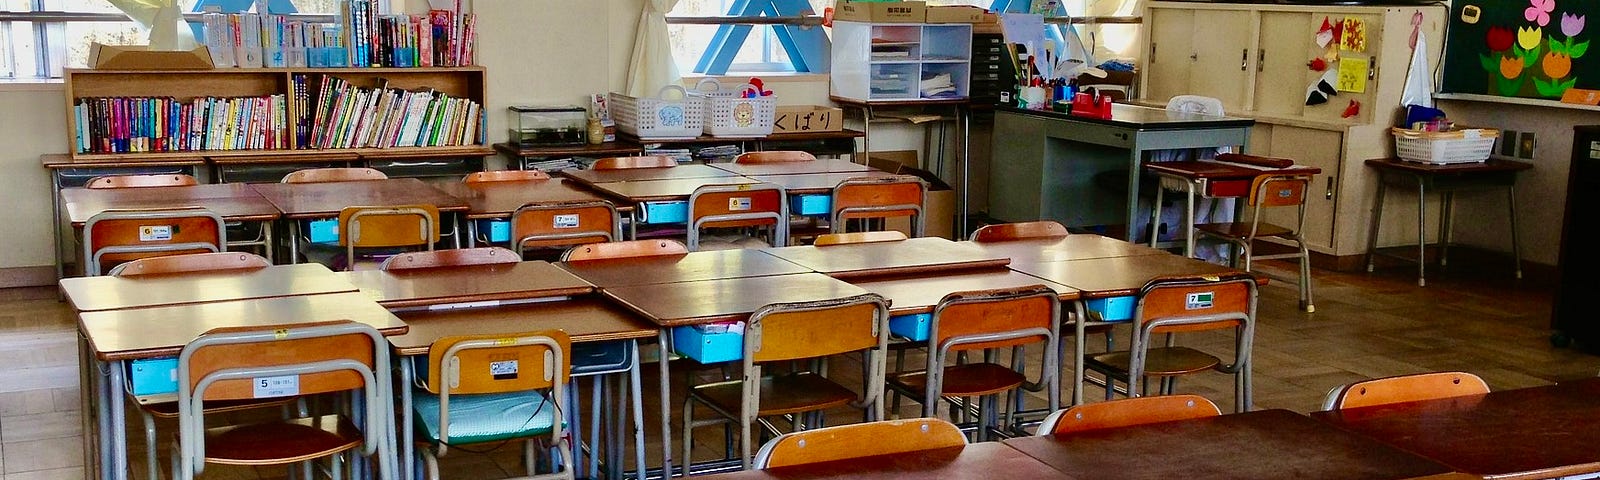 Japanese classroom, complete with clutter and wooden desks.